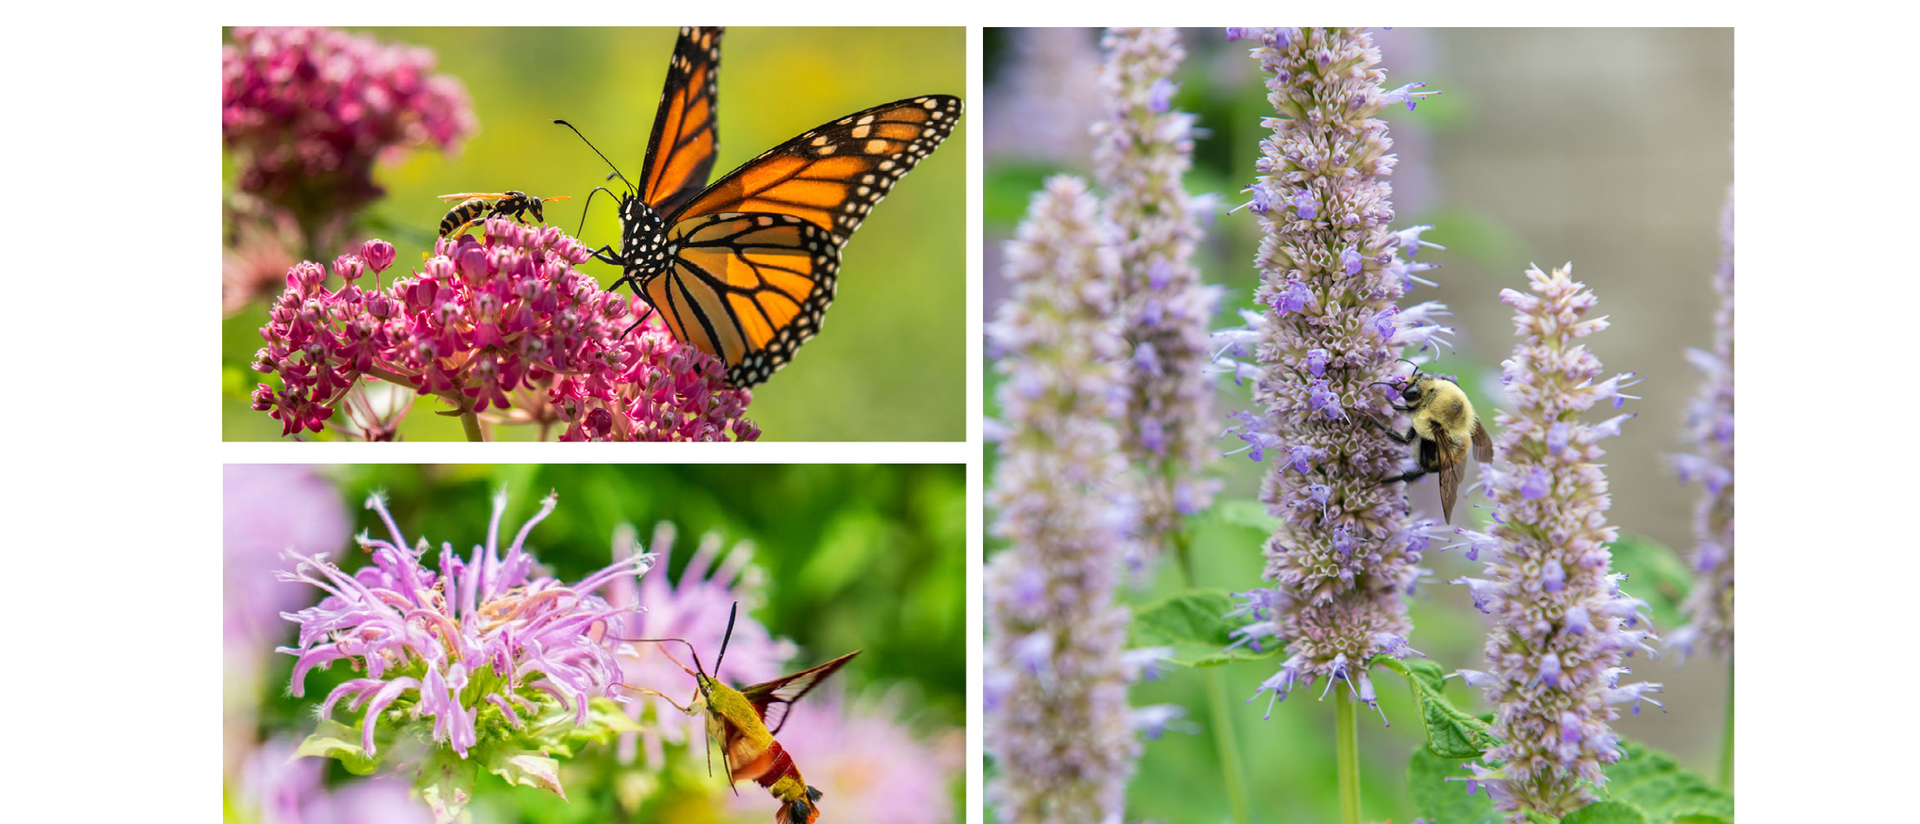 Colorful photos of Monarch Butterflies and Bees on flowers located throughout campus.